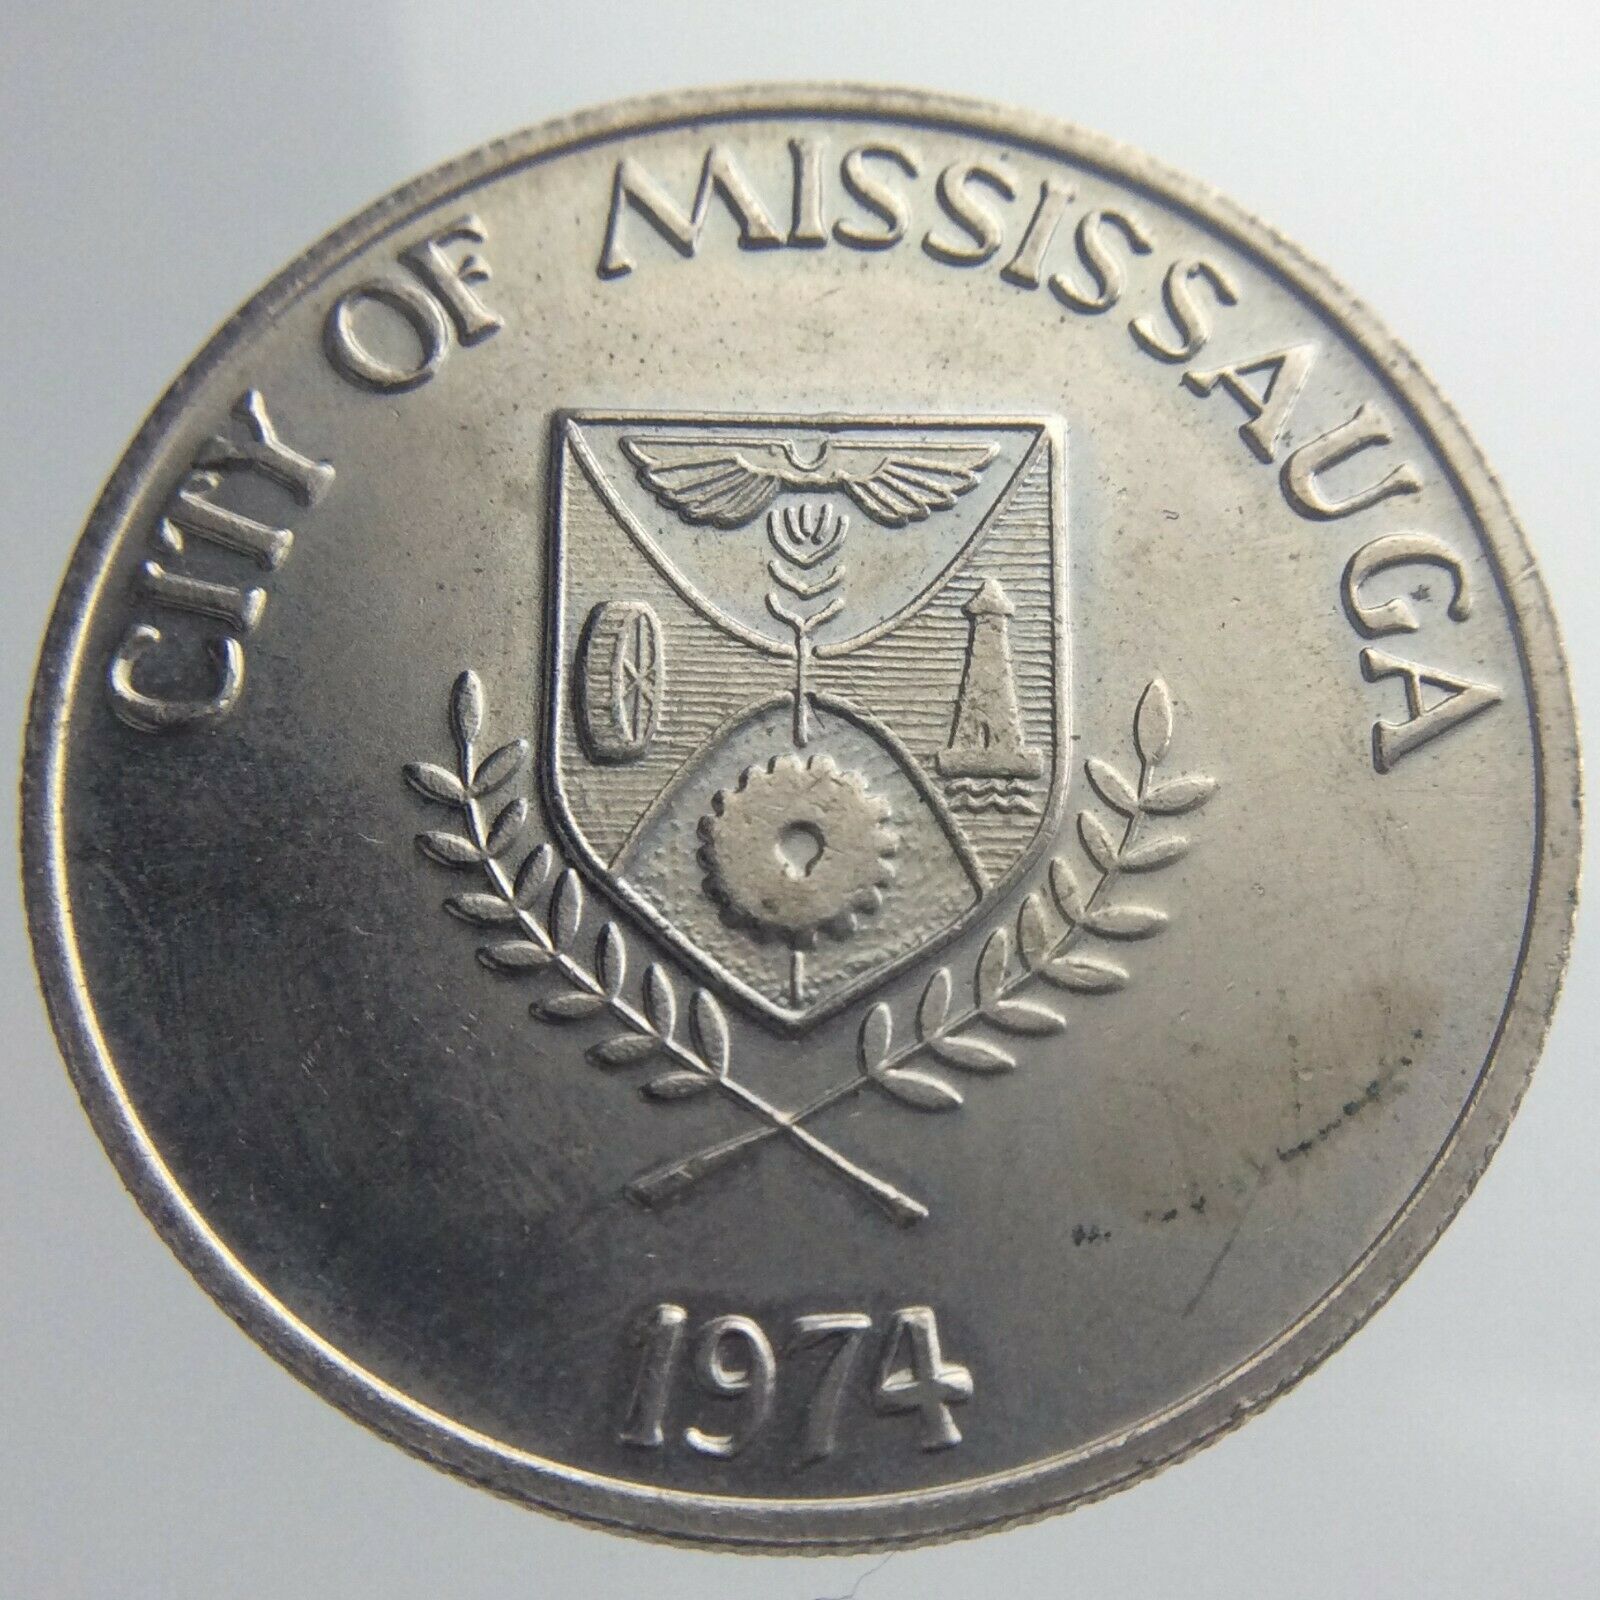 1974 Mississauga Corporation Of The Township Toronto Scales Trade Dollar V370